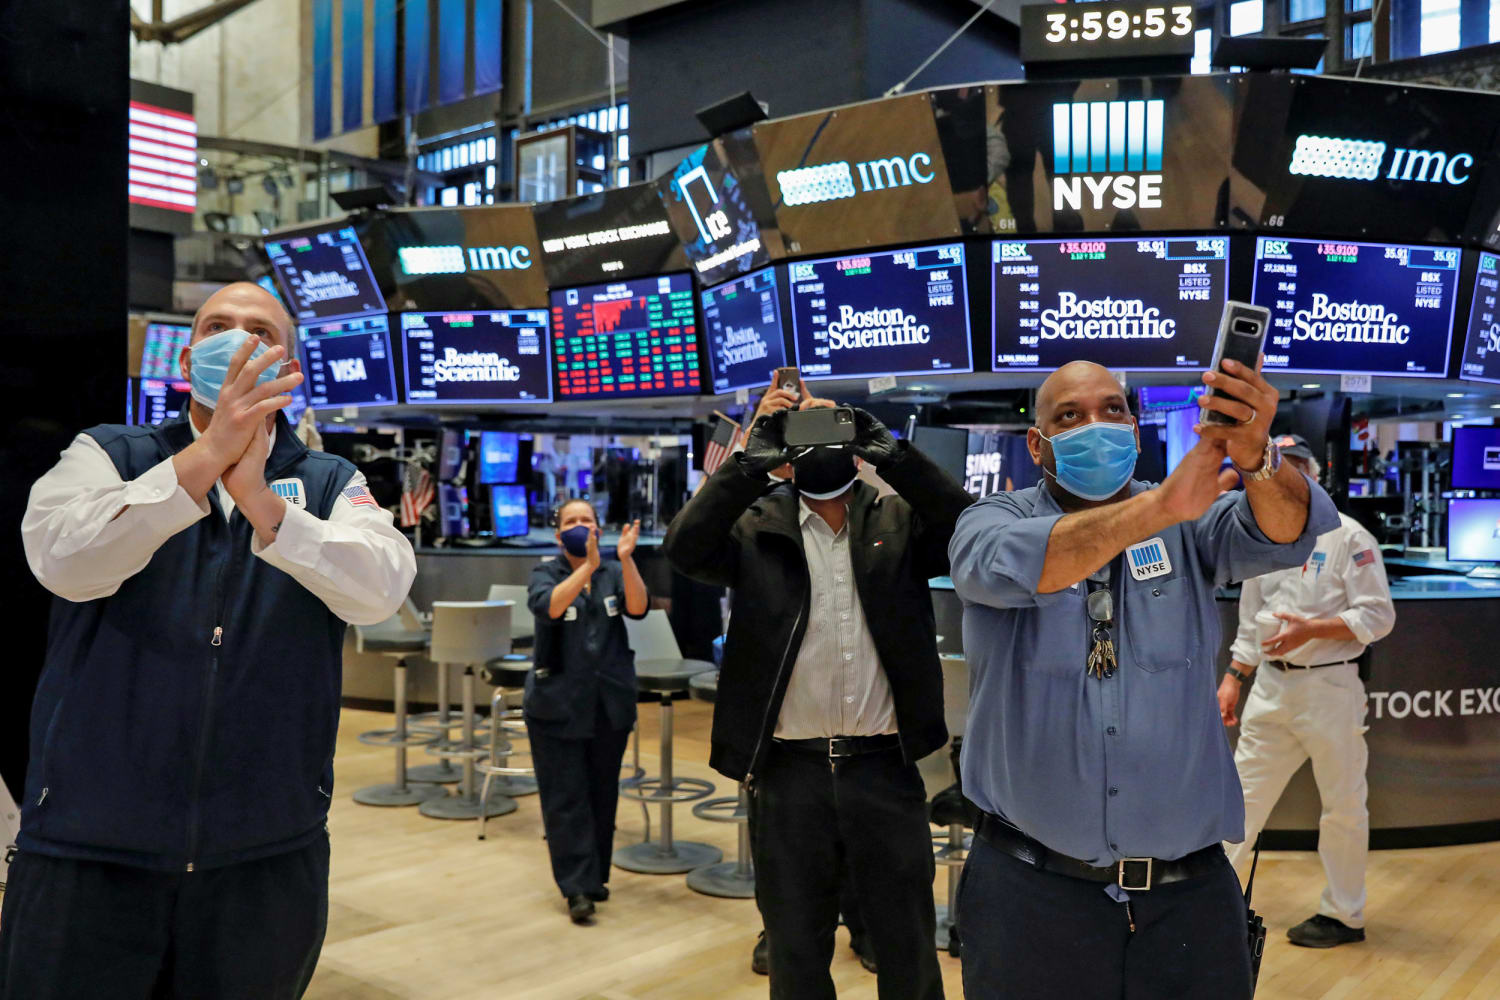 Stocks soar despite coronavirus and a recession. It's time for a reality check, and a crash.